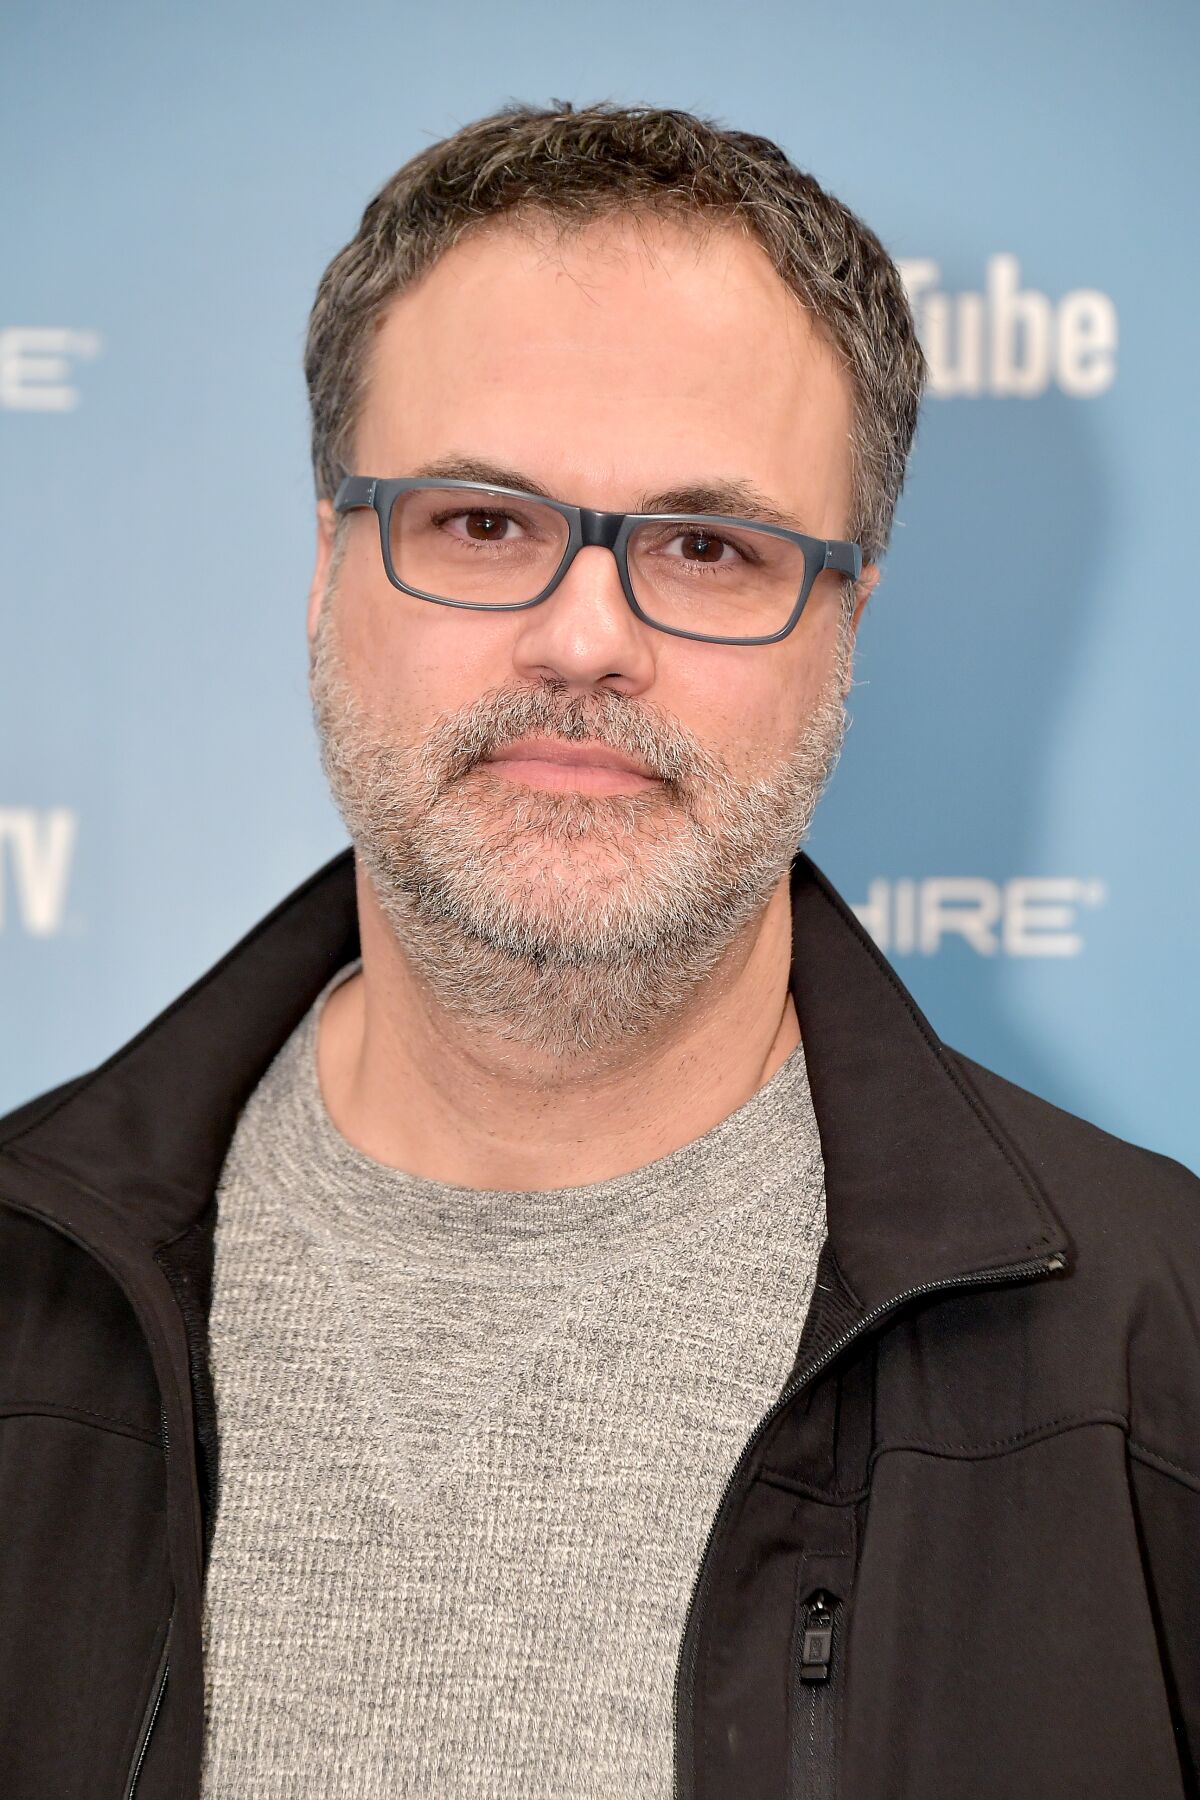 A headshot of a man in glasses and a gray t-shirt